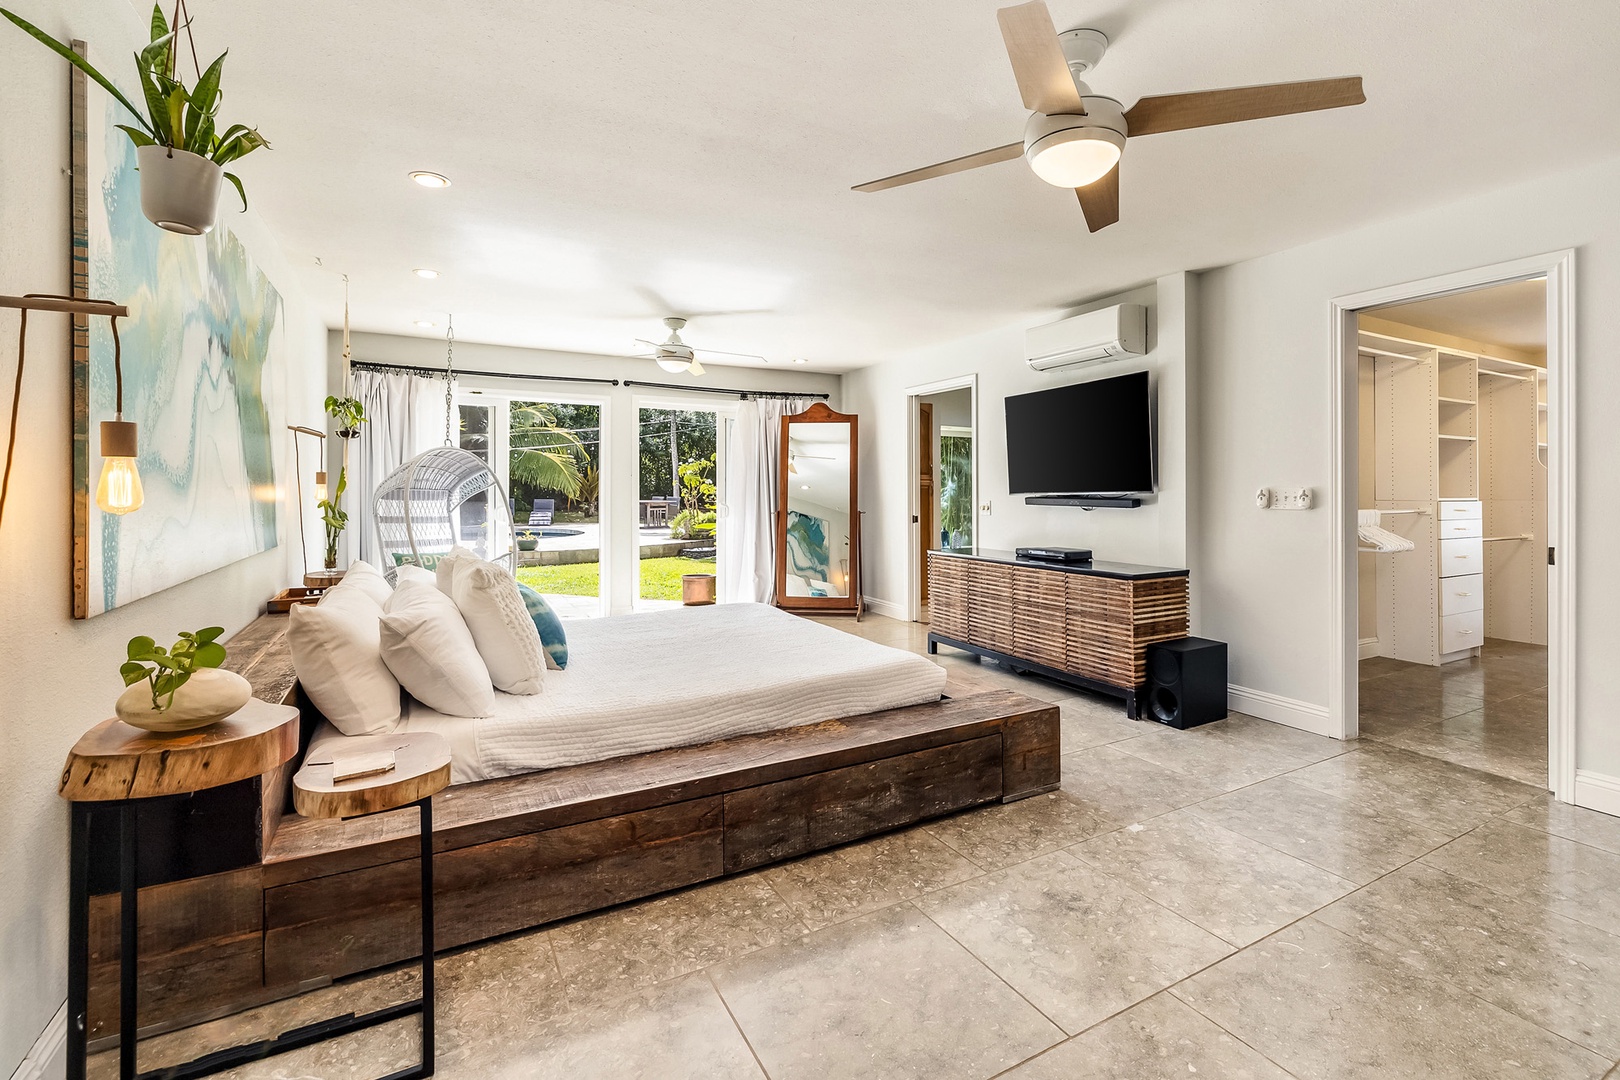 Honolulu Vacation Rentals, Hale Ho'omaha - There's direct access to the lanai and a flat screen TV